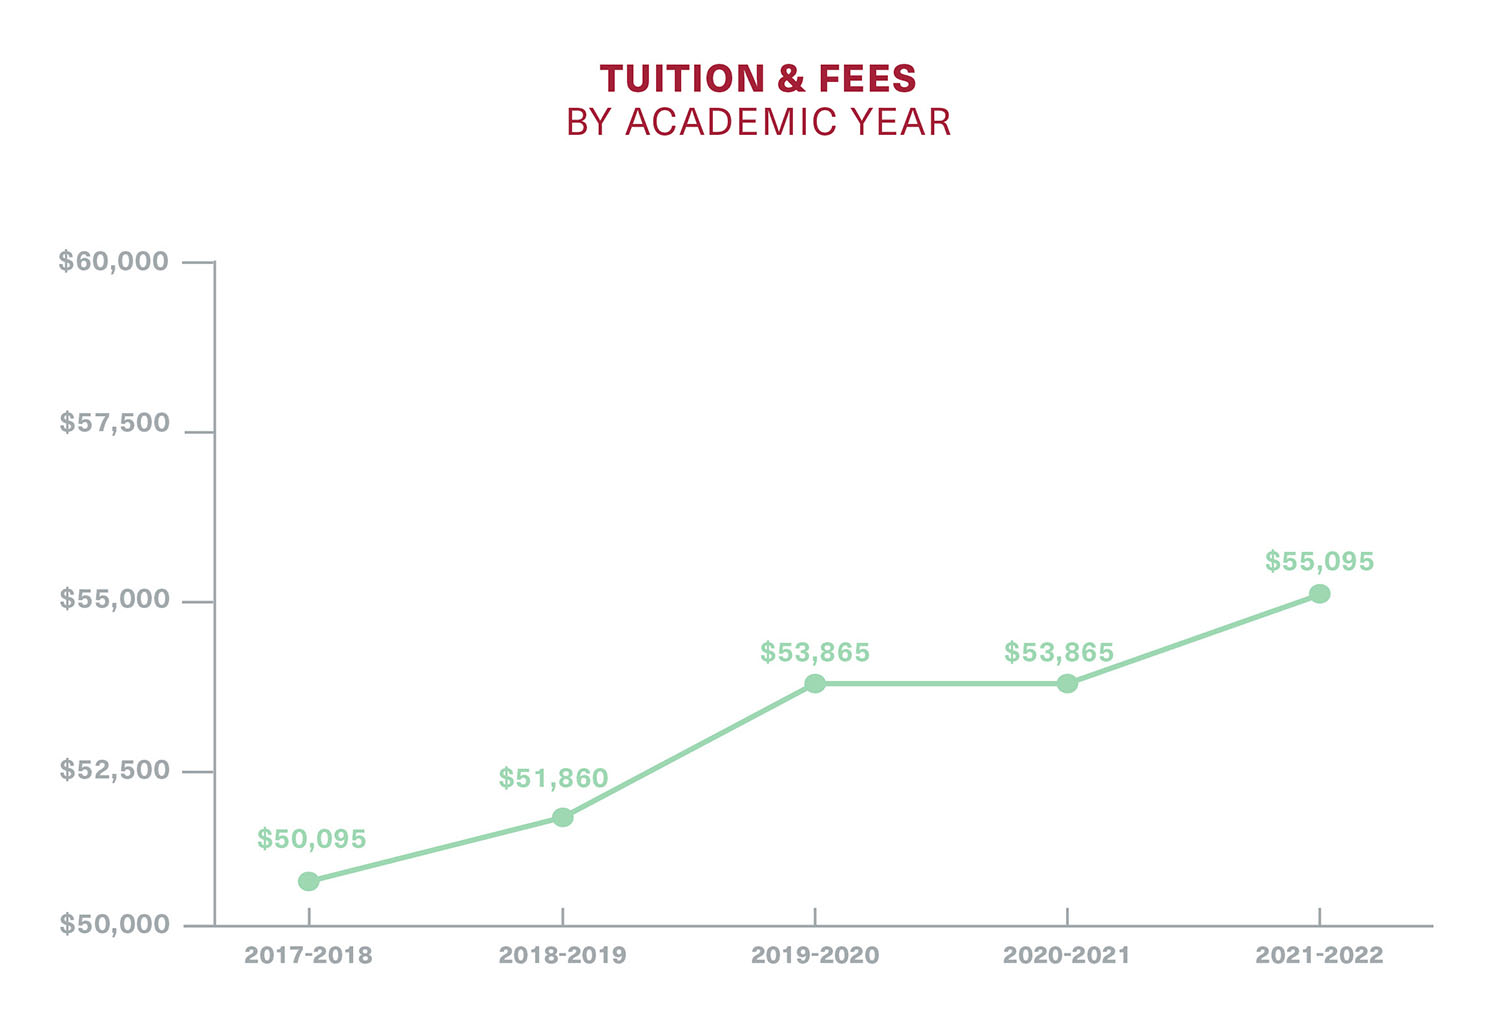 Line chart depicting tuition & fees by academic year, 2017-2022.